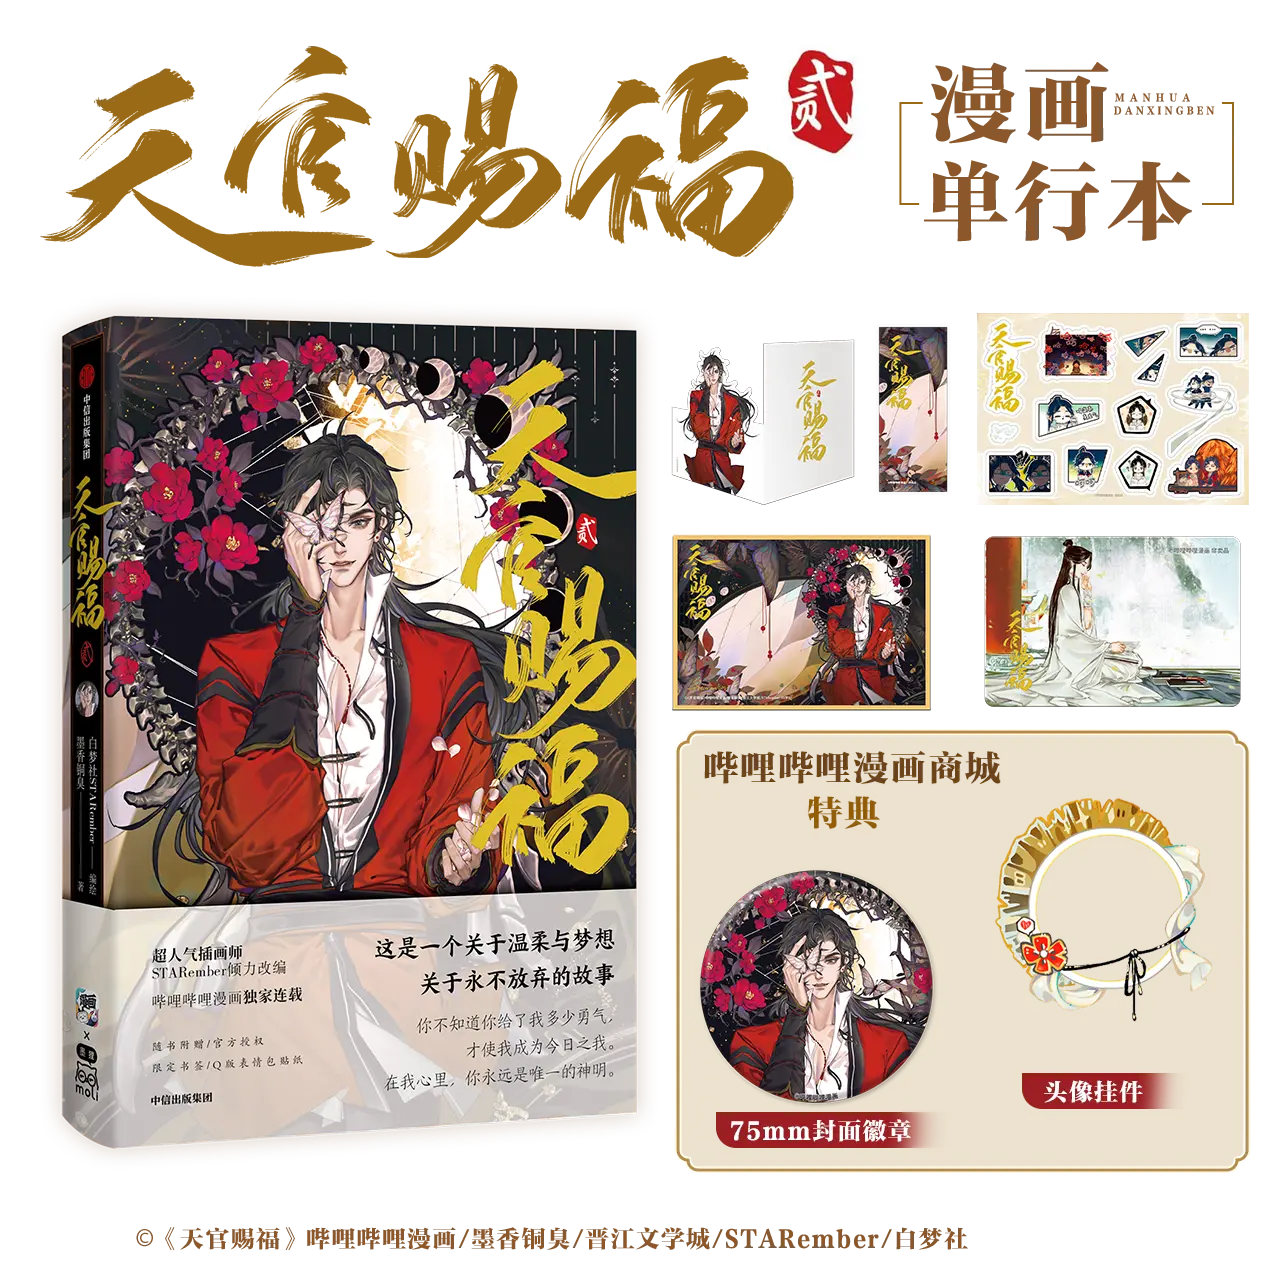 [IS] TGCF Manhua - Volume 2 (Version A Special Edition)